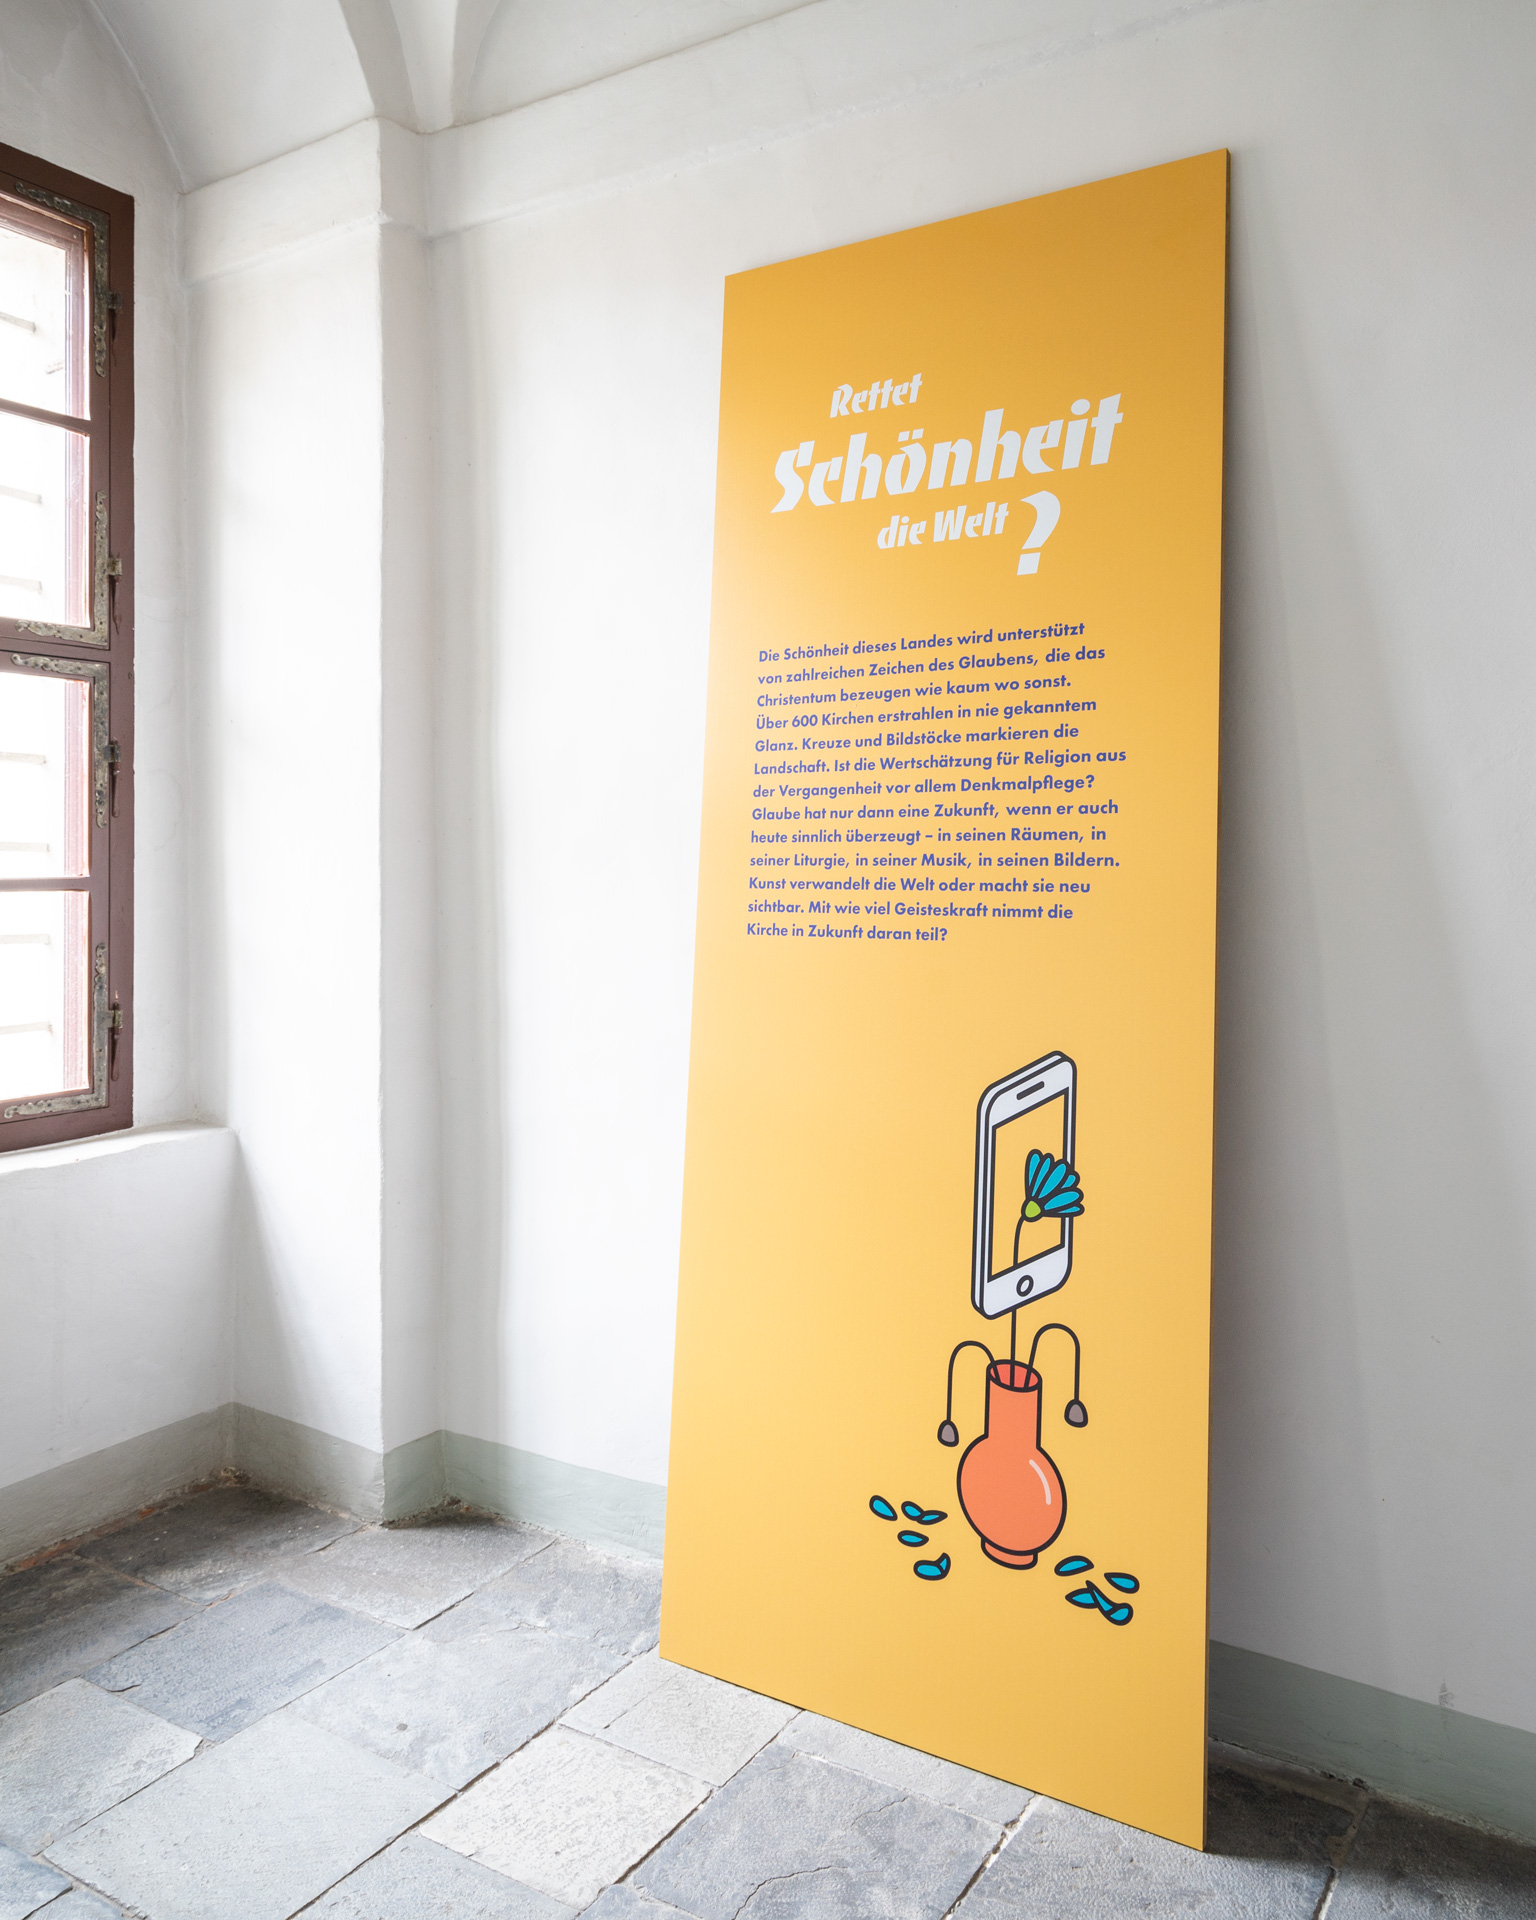 A directly printed on MDF board leaning against a wall with exhibition text and illustration on yellow background